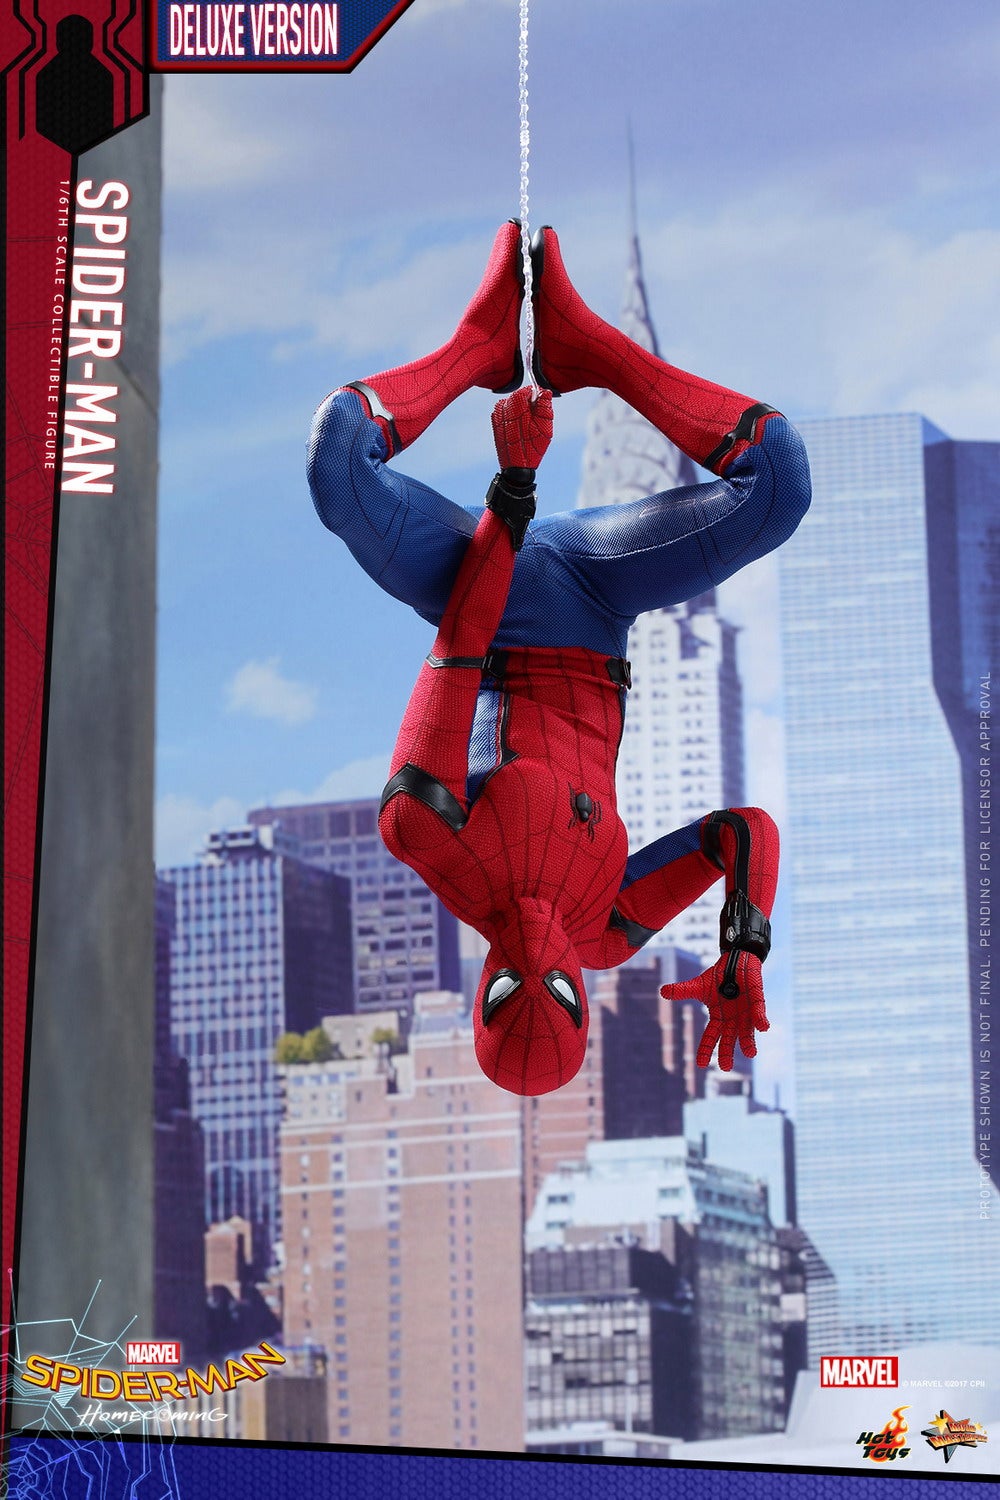 Hot-Toys---SMHC---Spider-Man-Collectible-Figure-(Deluxe-Version)_PR7